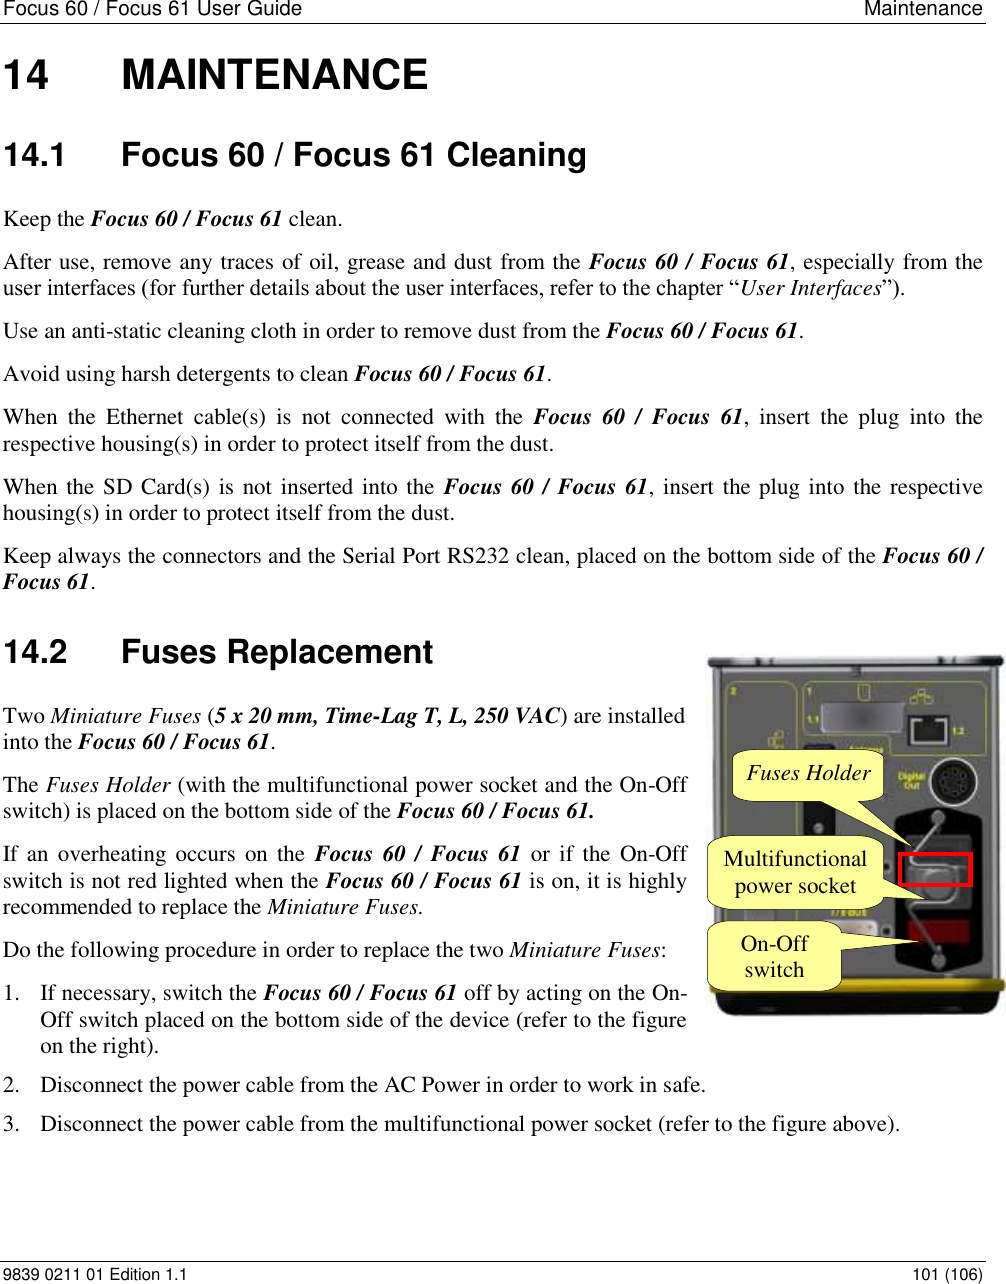 Focus 60 / Focus 61 User Guide  Maintenance   9839 0211 01 Edition 1.1    101 (106) 14  MAINTENANCE 14.1  Focus 60 / Focus 61 Cleaning Keep the Focus 60 / Focus 61 clean. After use, remove any traces of oil, grease and dust from the Focus 60 / Focus 61, especially from the user interfaces (for further details about the user interfaces, refer to the chapter “User Interfaces”).  Use an anti-static cleaning cloth in order to remove dust from the Focus 60 / Focus 61. Avoid using harsh detergents to clean Focus 60 / Focus 61. When  the  Ethernet  cable(s)  is  not  connected  with  the  Focus  60  /  Focus  61,  insert  the  plug  into  the respective housing(s) in order to protect itself from the dust. When the SD Card(s) is not inserted into the  Focus 60 / Focus 61, insert the plug into the respective housing(s) in order to protect itself from the dust. Keep always the connectors and the Serial Port RS232 clean, placed on the bottom side of the Focus 60 / Focus 61. 14.2  Fuses Replacement Two Miniature Fuses (5 x 20 mm, Time-Lag T, L, 250 VAC) are installed into the Focus 60 / Focus 61.  The Fuses Holder (with the multifunctional power socket and the On-Off switch) is placed on the bottom side of the Focus 60 / Focus 61. If an  overheating occurs  on the  Focus 60  / Focus 61  or if  the  On-Off switch is not red lighted when the Focus 60 / Focus 61 is on, it is highly recommended to replace the Miniature Fuses. Do the following procedure in order to replace the two Miniature Fuses: 1. If necessary, switch the Focus 60 / Focus 61 off by acting on the On-Off switch placed on the bottom side of the device (refer to the figure on the right). 2. Disconnect the power cable from the AC Power in order to work in safe. 3. Disconnect the power cable from the multifunctional power socket (refer to the figure above).   Fuses Holder Multifunctional power socket On-Off switch 